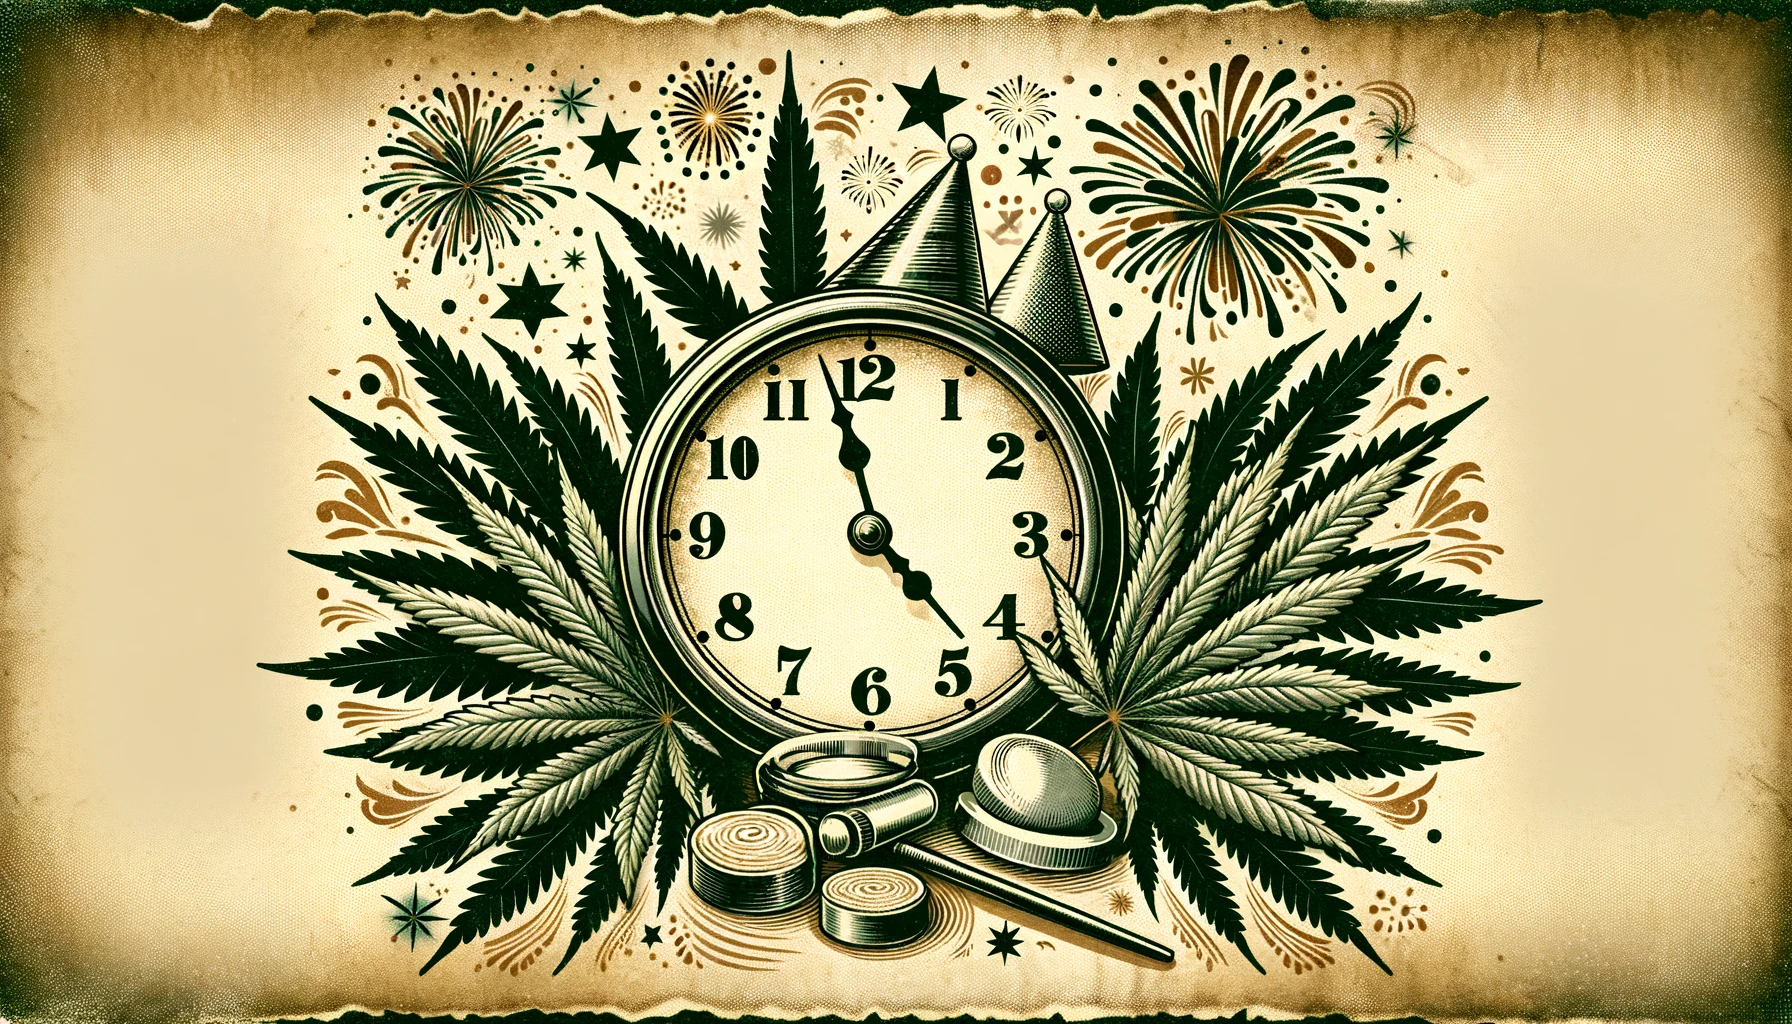 DALL·E 2024 01 02 13.37.20 A vintage New Years themed graphic with a correctly numbered clock striking midnight incorporating hemp motifs. The background should resemble old p